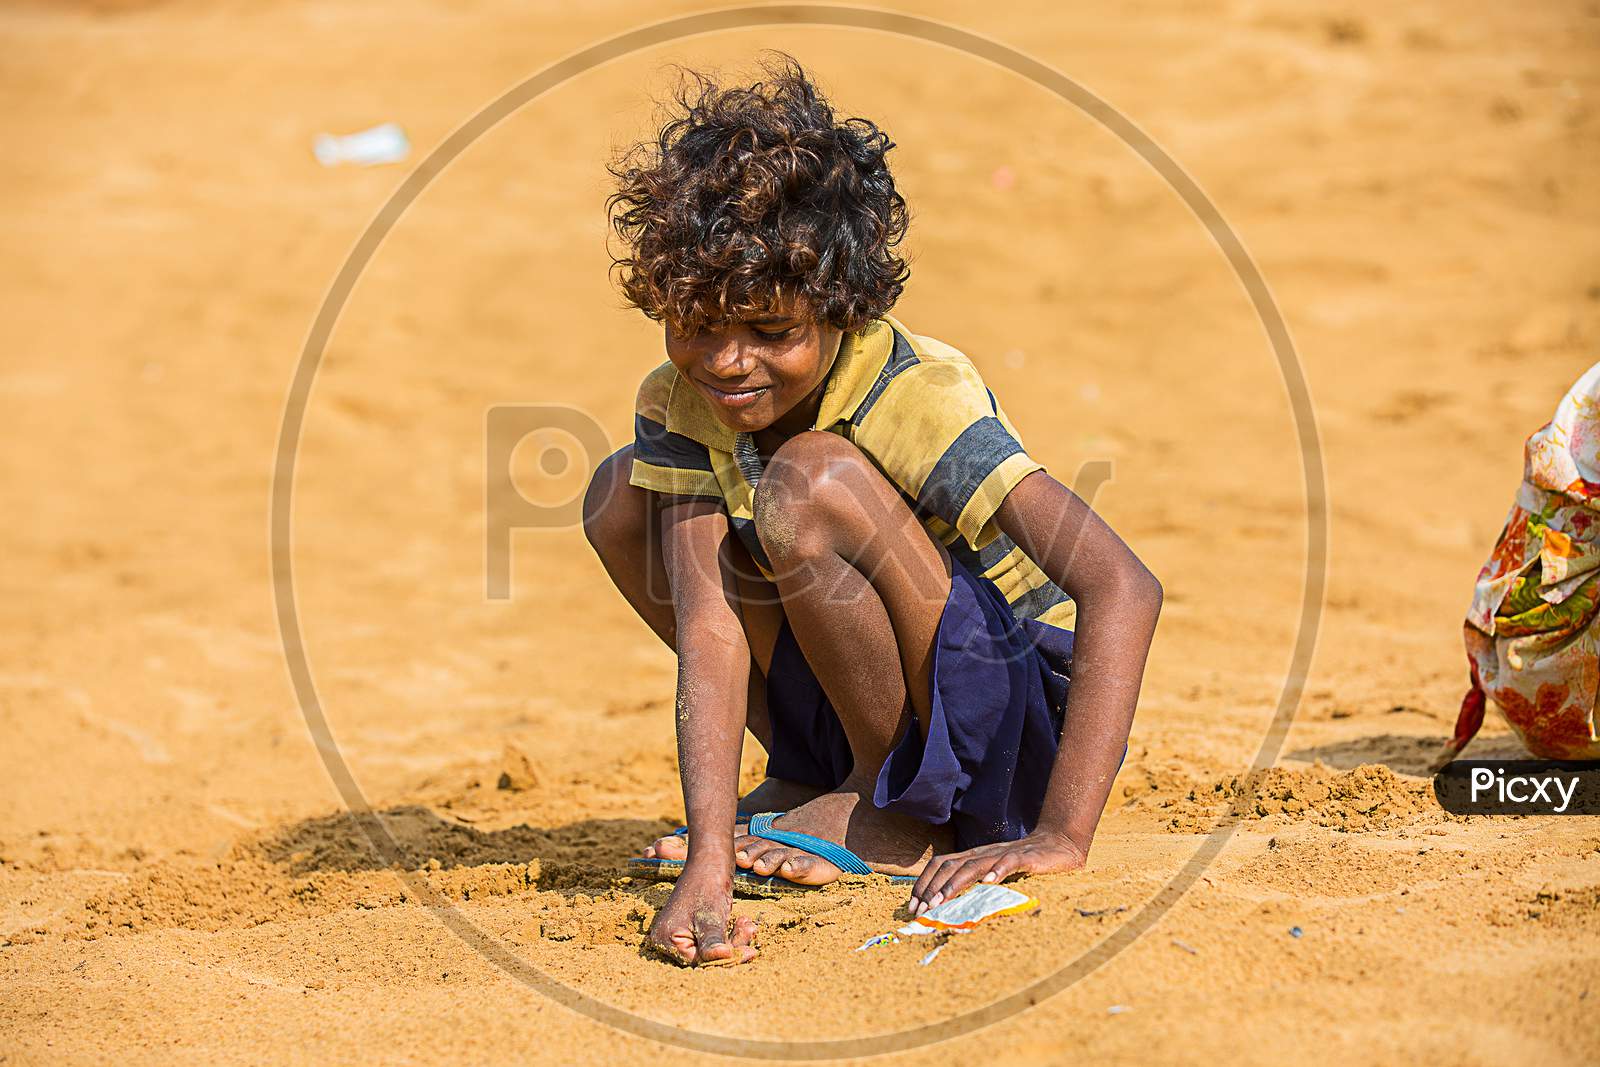 Jodhpur, Rajasthan, India - June 18Th, 2019: Poor Rural Boy Kid Playing With Sand In Hot Summer, Smiling Towards Camera, Poverty Unprivileged Indian Children.